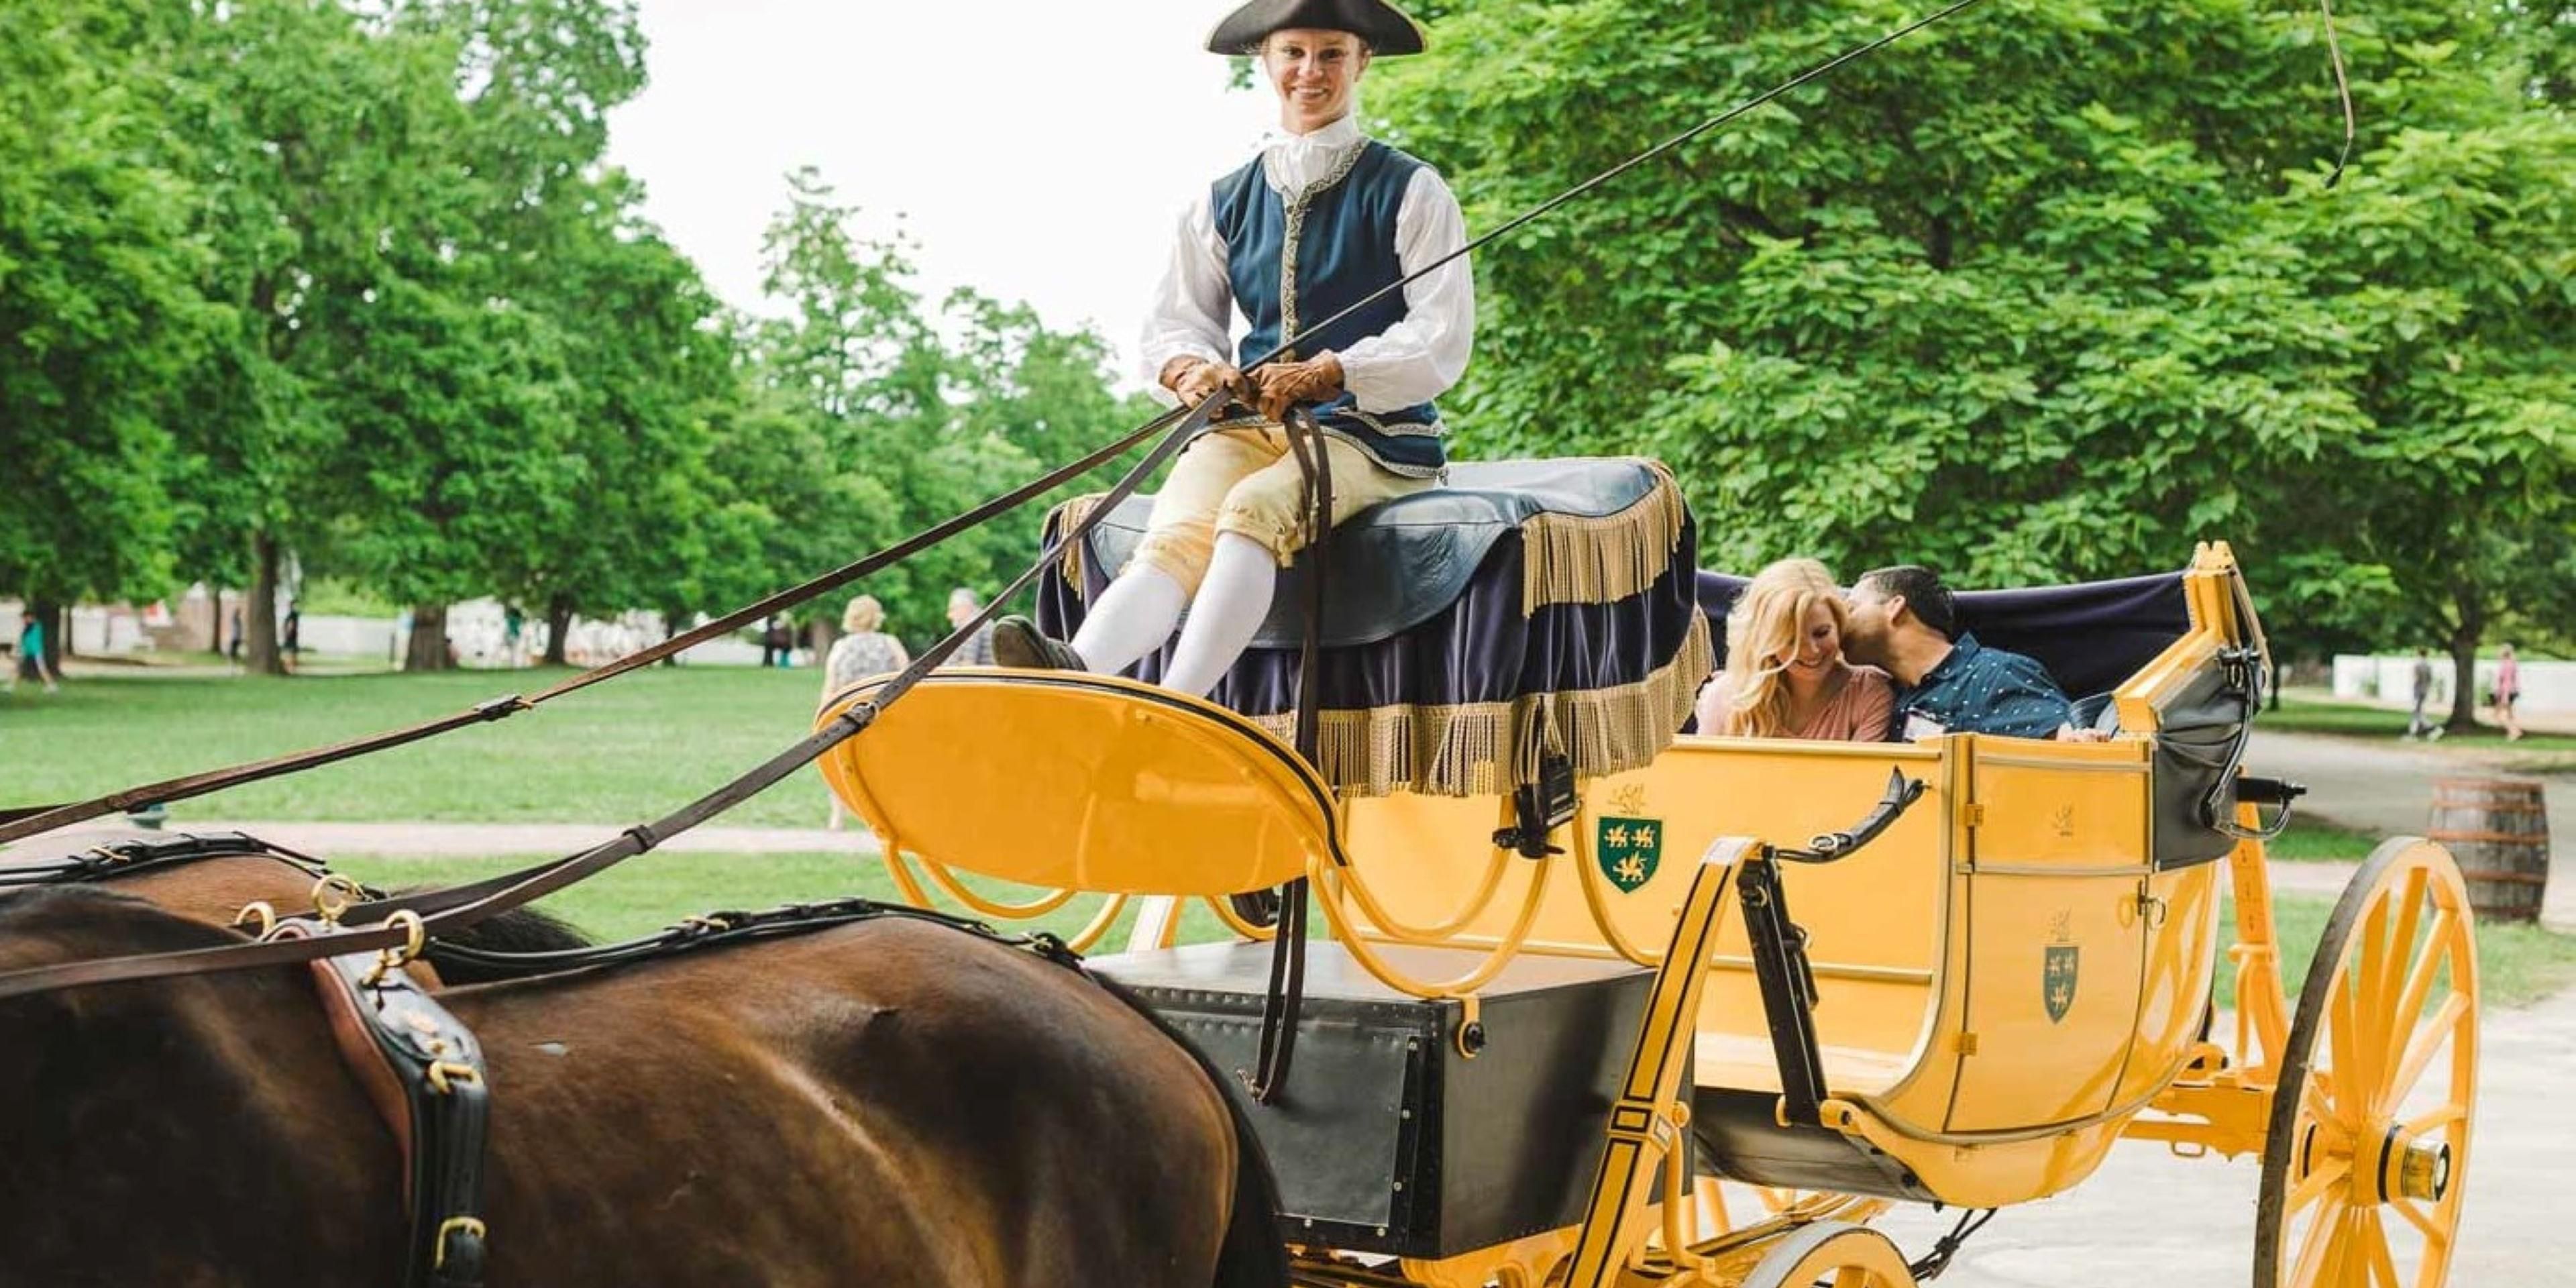 Stay with us at the Holiday inn express Busch Gardens and you are just minutes away from a memorable holiday experience.  Celebrate the holidays with a carriage ride through Historic Colonial Williamsburg. As you return from your carriage experience, relax in our spacious guest rooms.